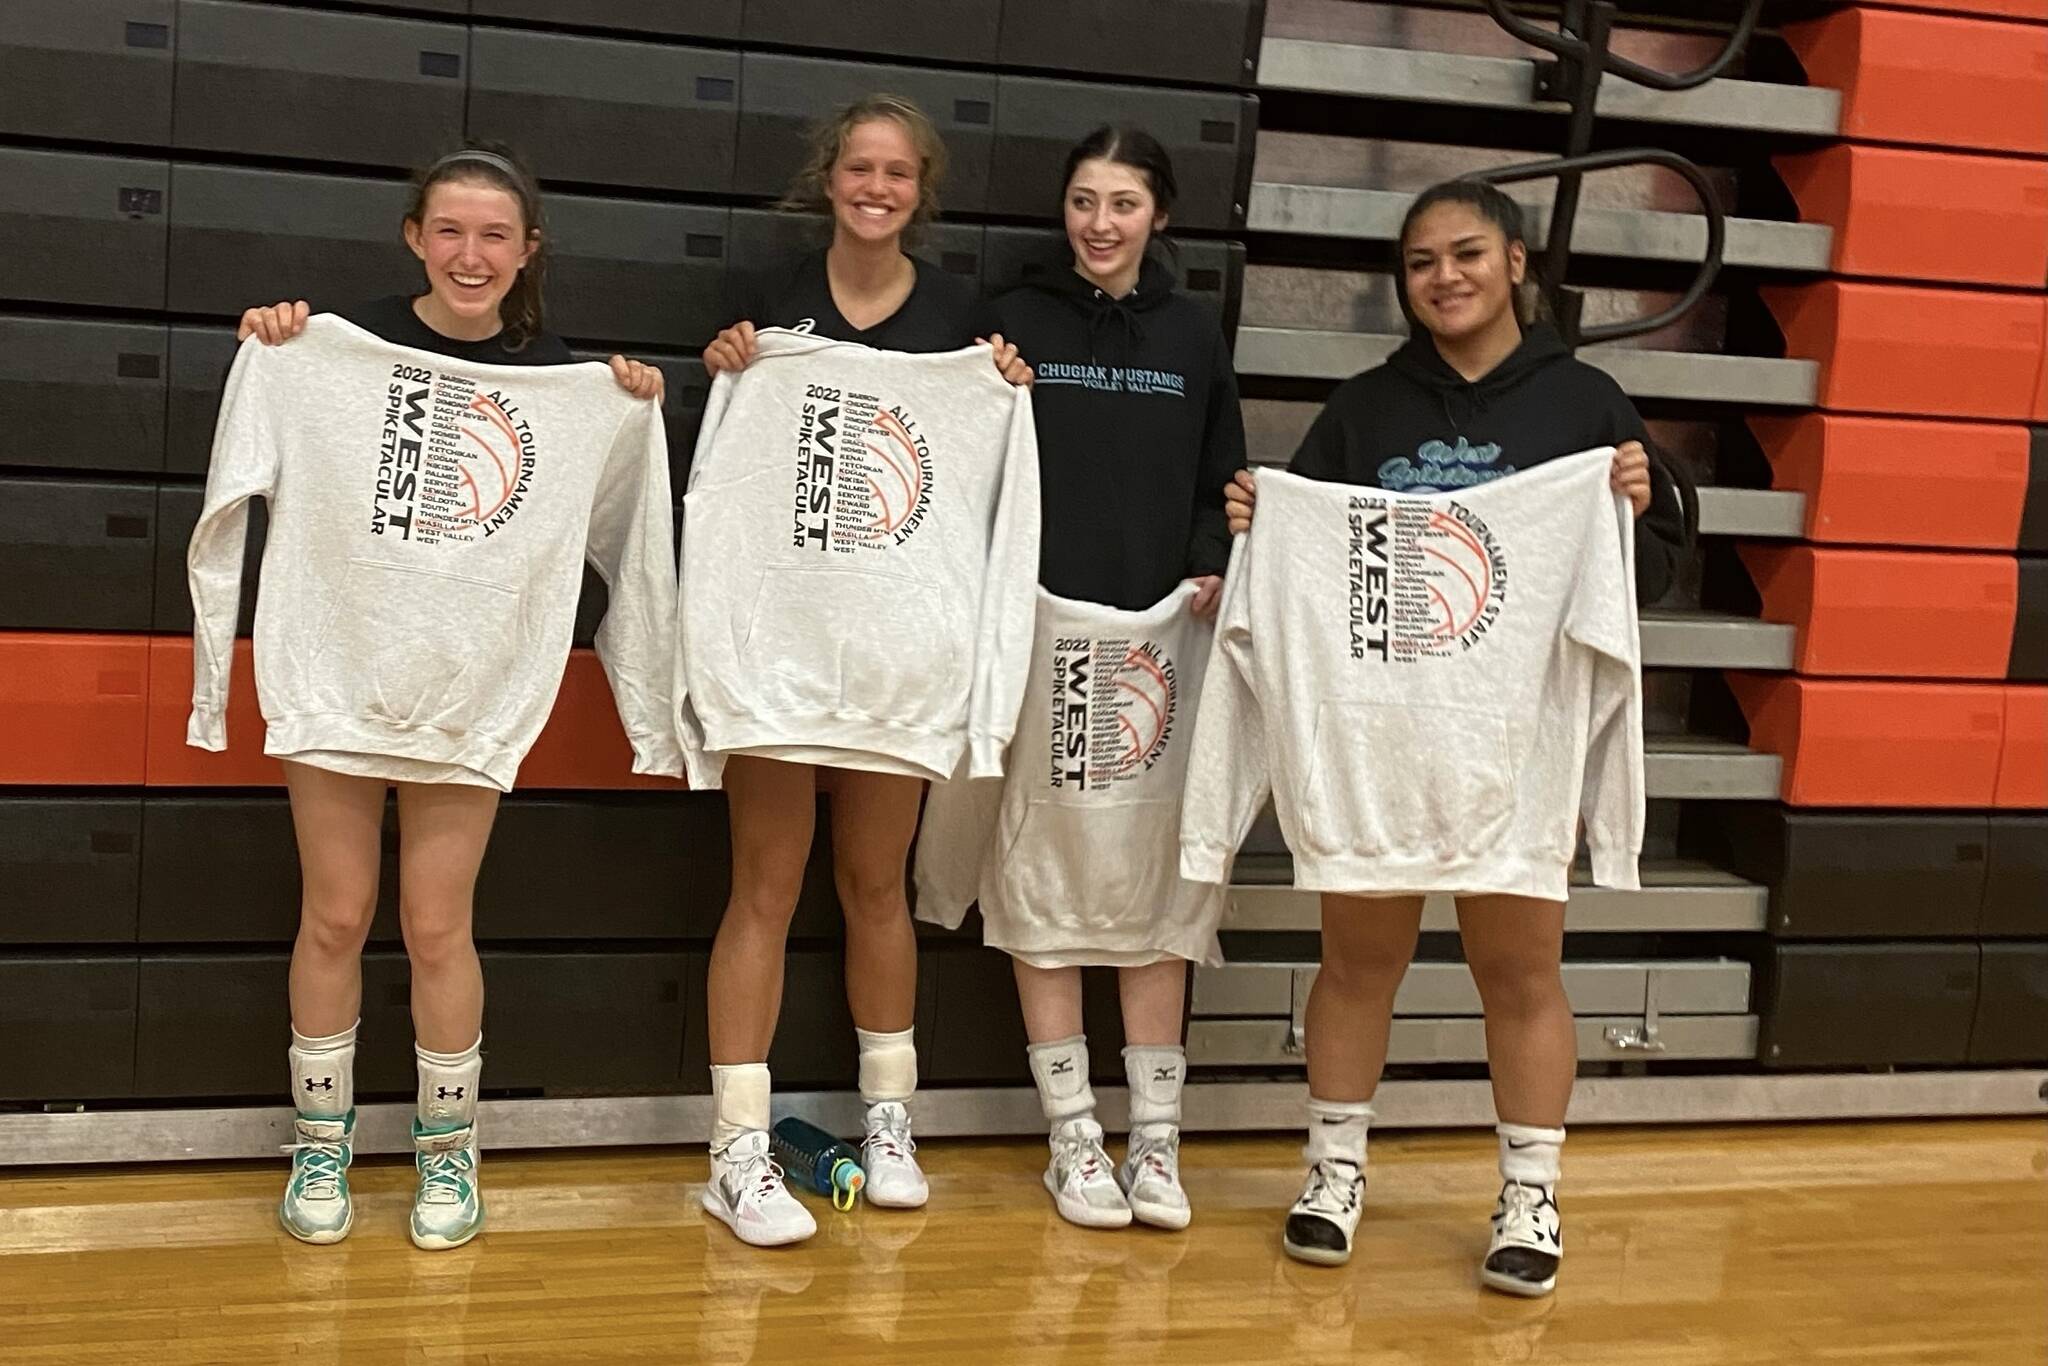 Senior Moana Tuviafale of Thunder Mountain High School (far right) was named to the all-tournament team at this year’s Spiktacular tournament this weekend at West Anchorage High School. From left to right, other players in photo are Hayden Inman of Chugiak High School, Liyah Pilgrim of Colony High School and Marija Wunnicke of South High School. (Courtesy Photo / Julie Herman)